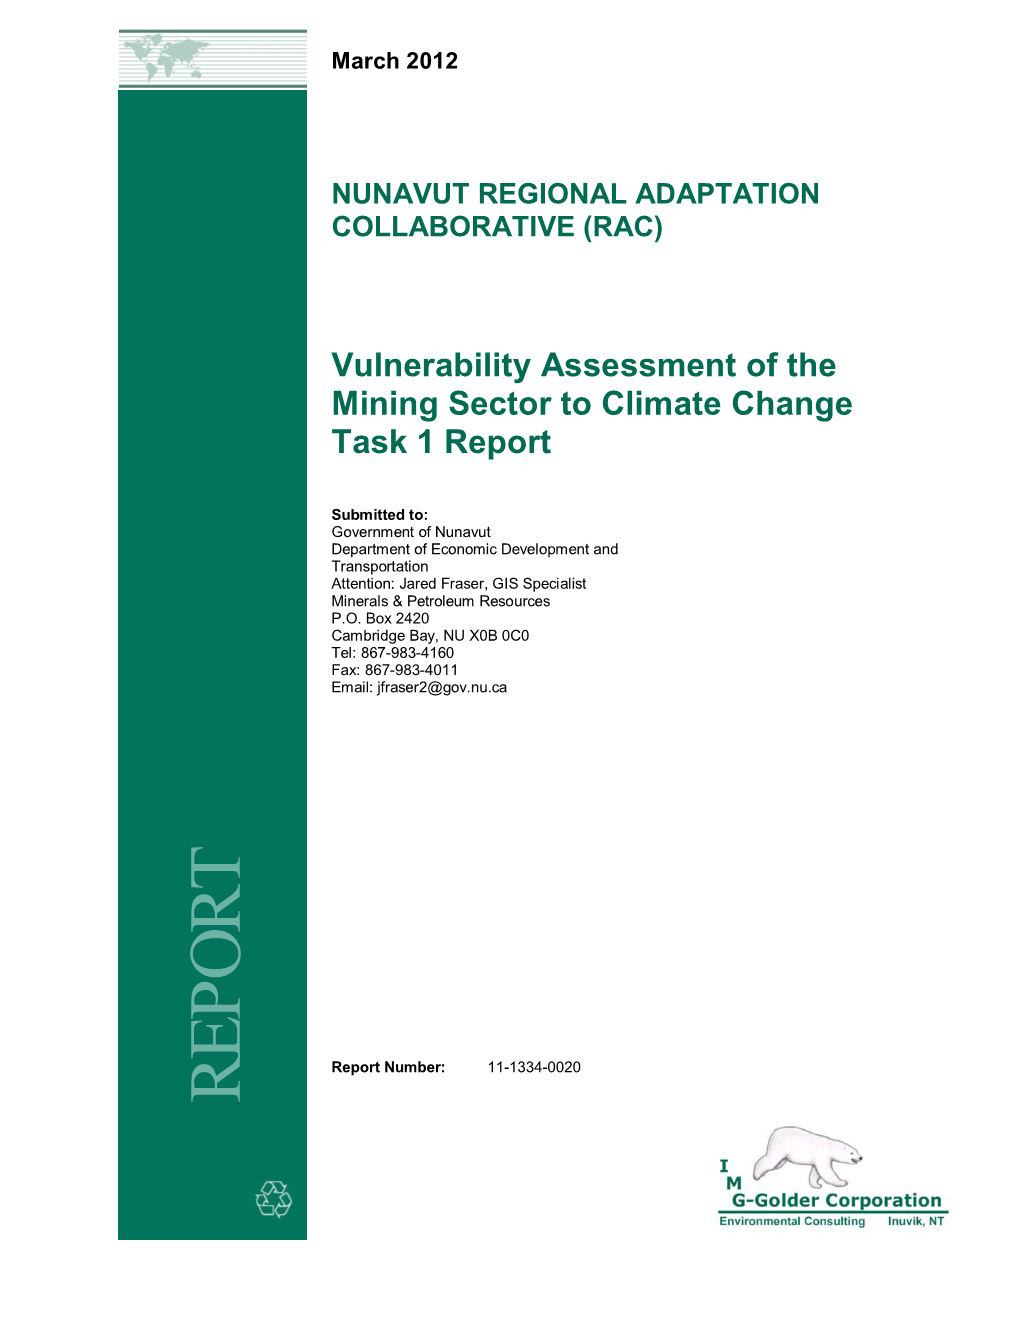 Vulnerability Assessment of Nunavut's Mining Sector to Climate Change